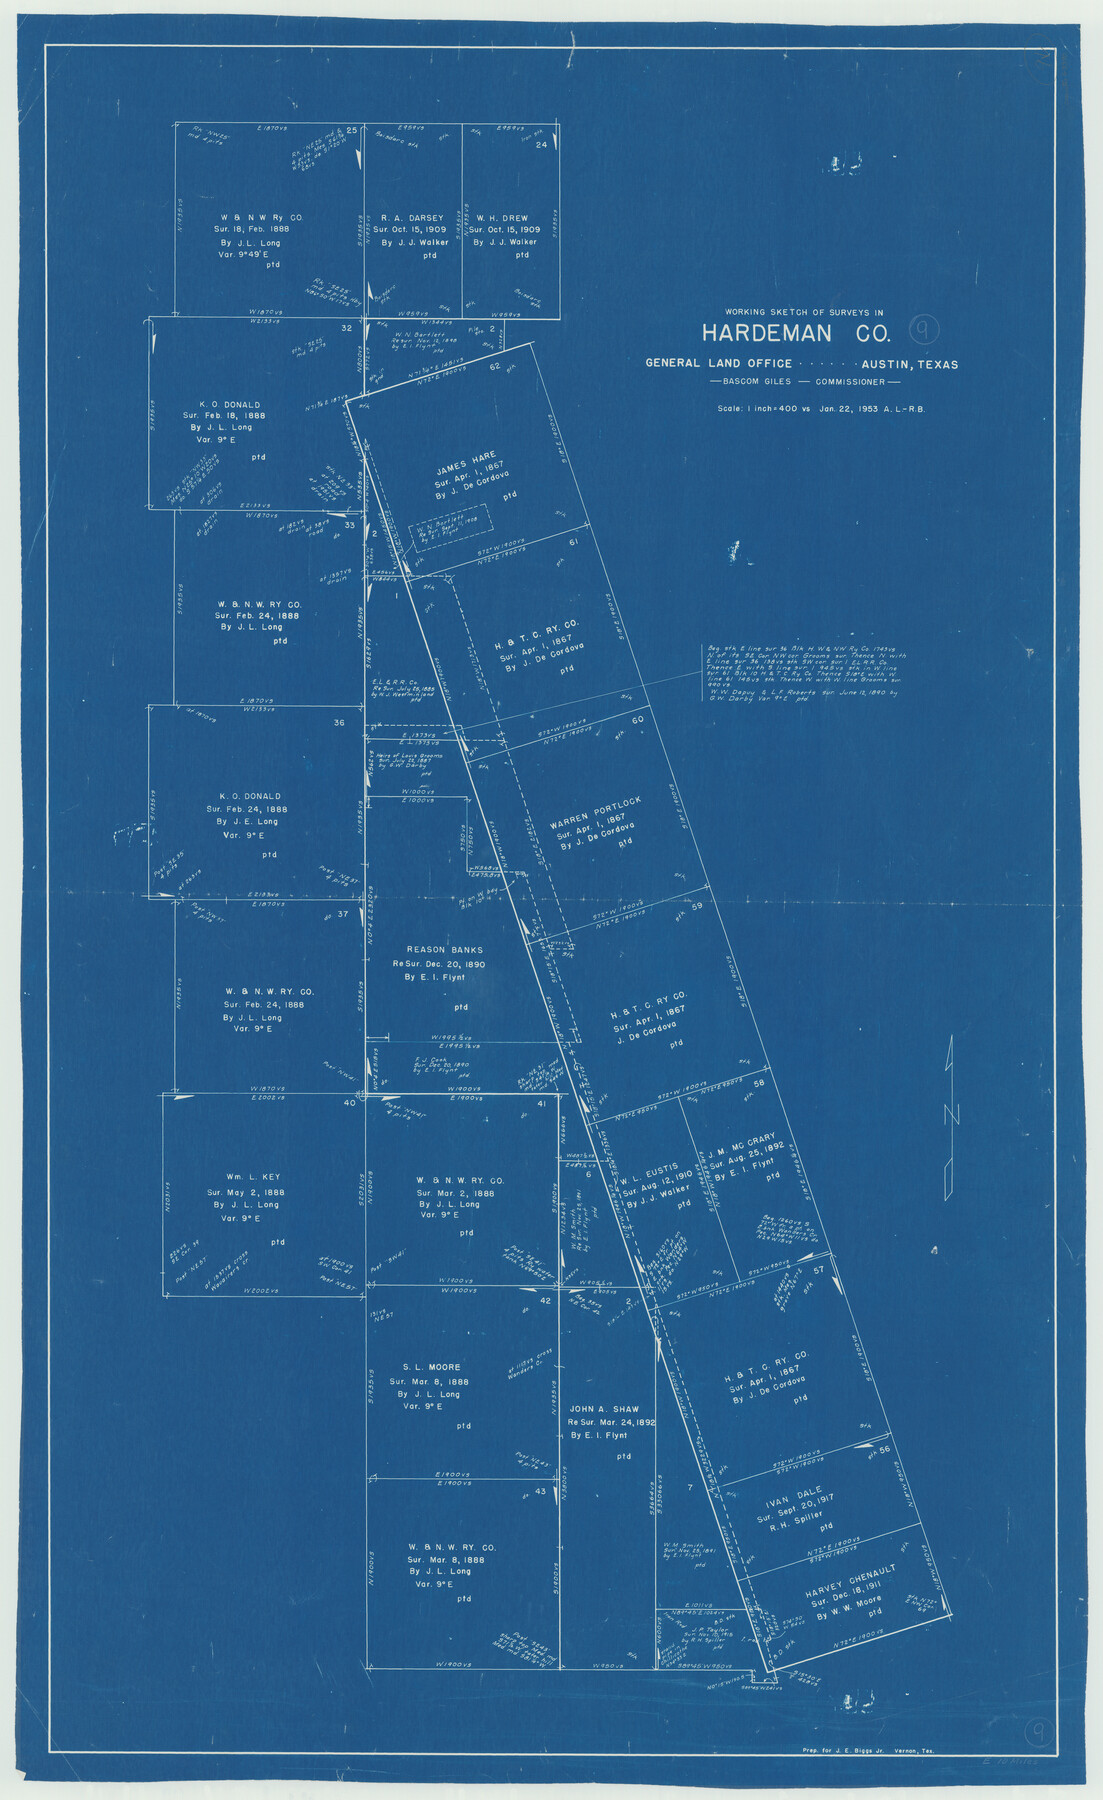 63390, Hardeman County Working Sketch 9, General Map Collection